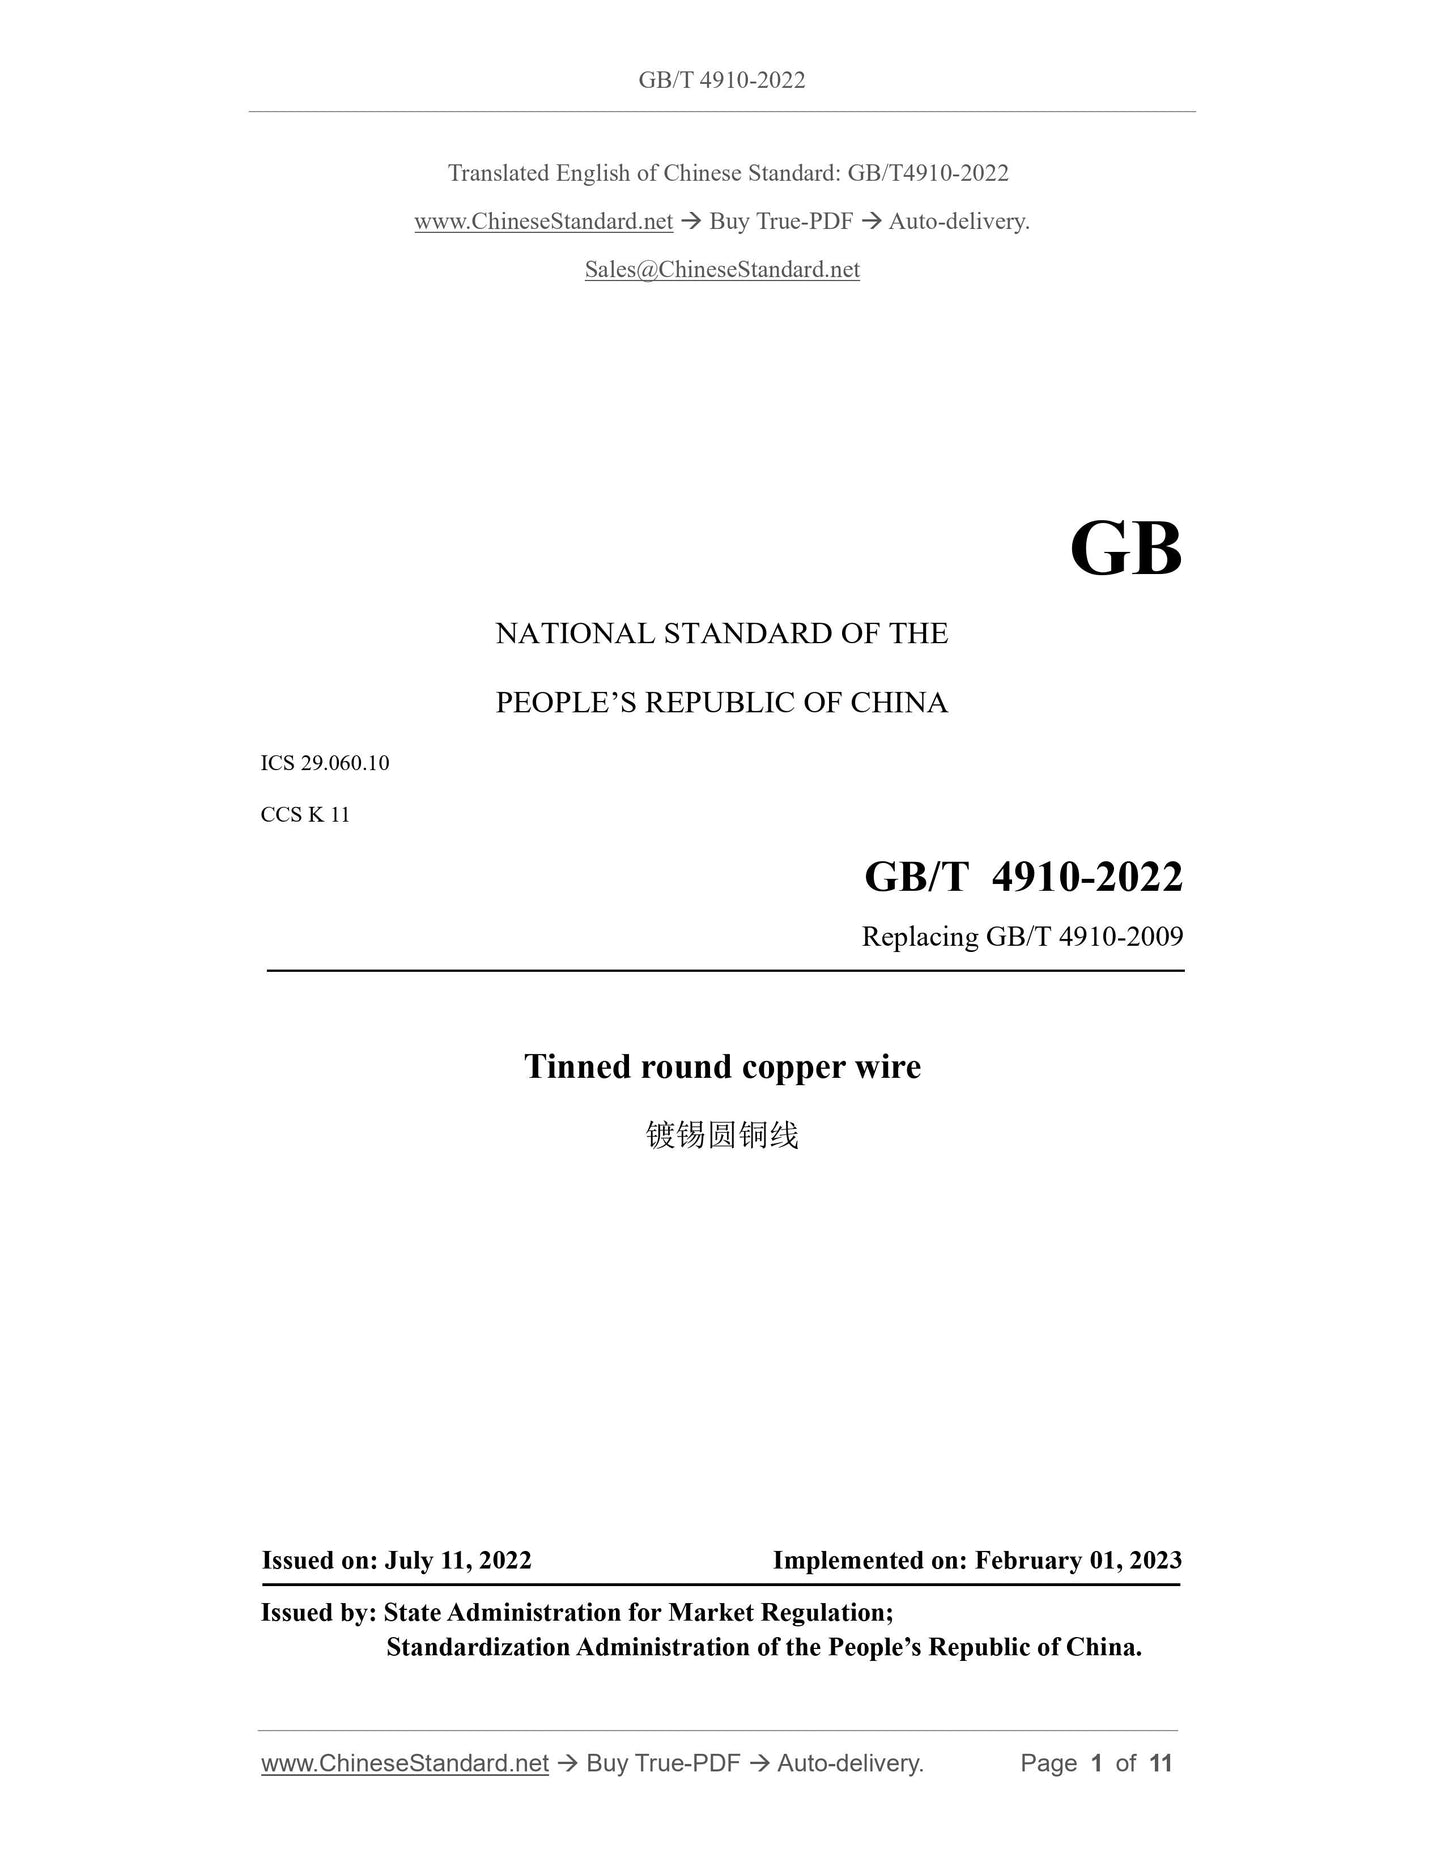 GB/T 4910-2022 Page 1